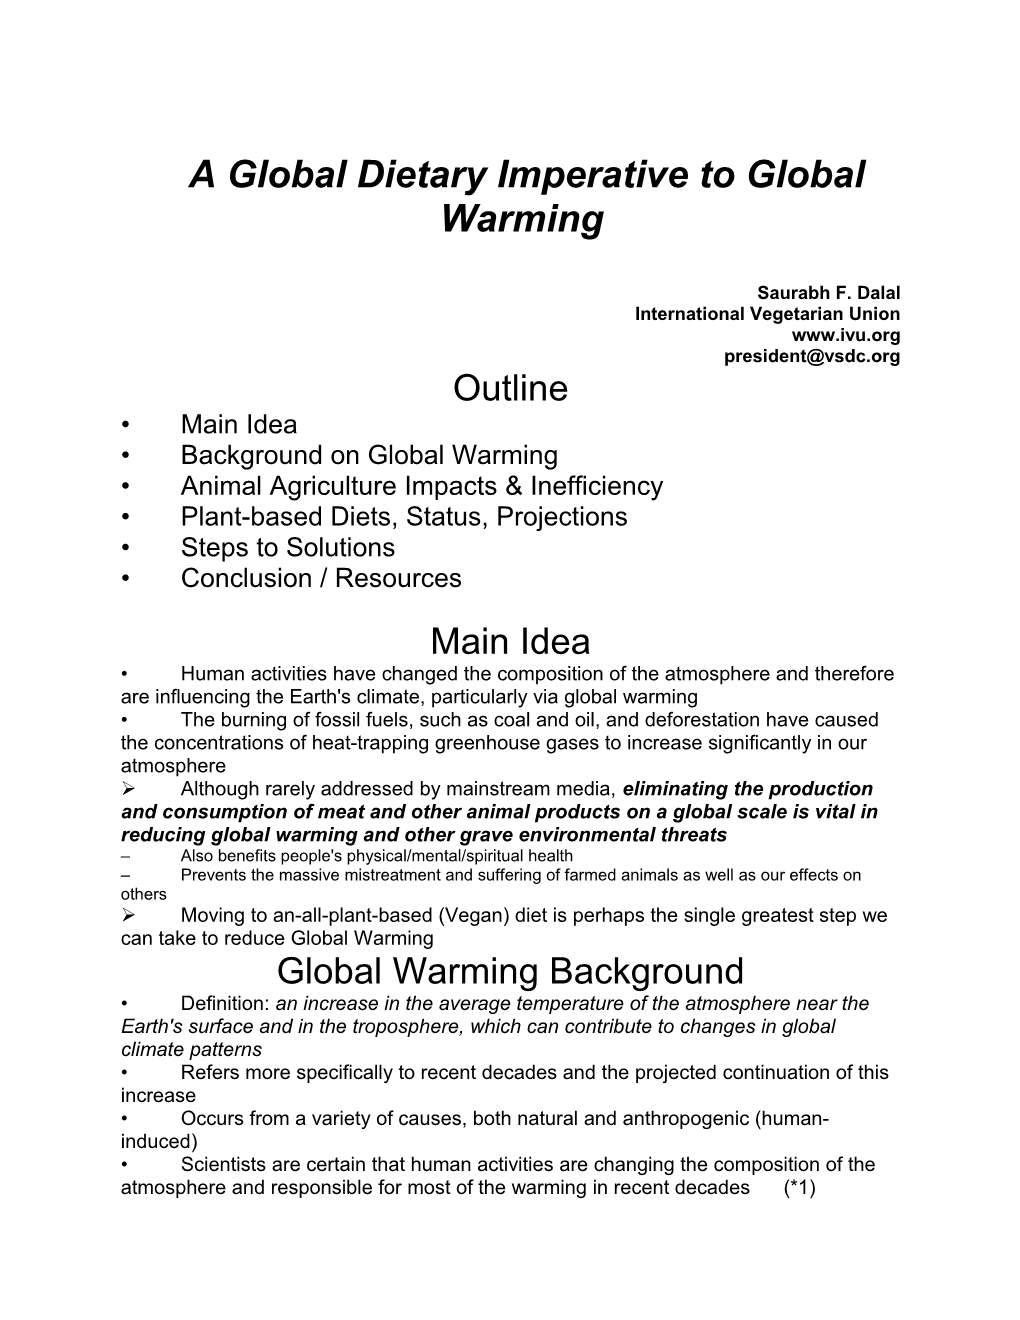 A Global Dietary Imperative to Global Warming